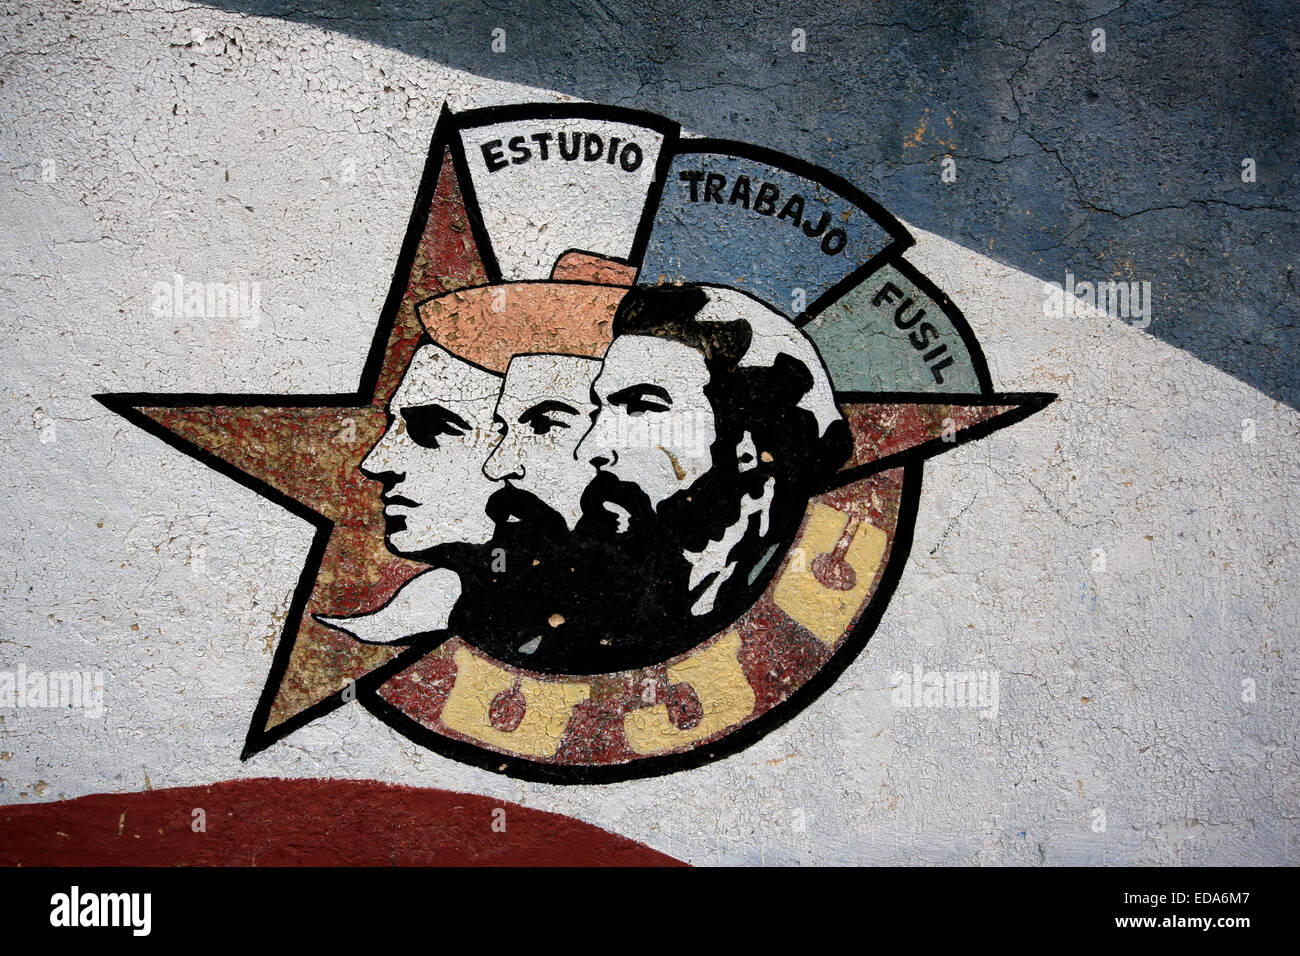 Symbol of The Young Communist League painted on a wall in Havana, Cuba with the motto Estudio Trabajo Fusil: Study, Work, Rifle Stock Photo